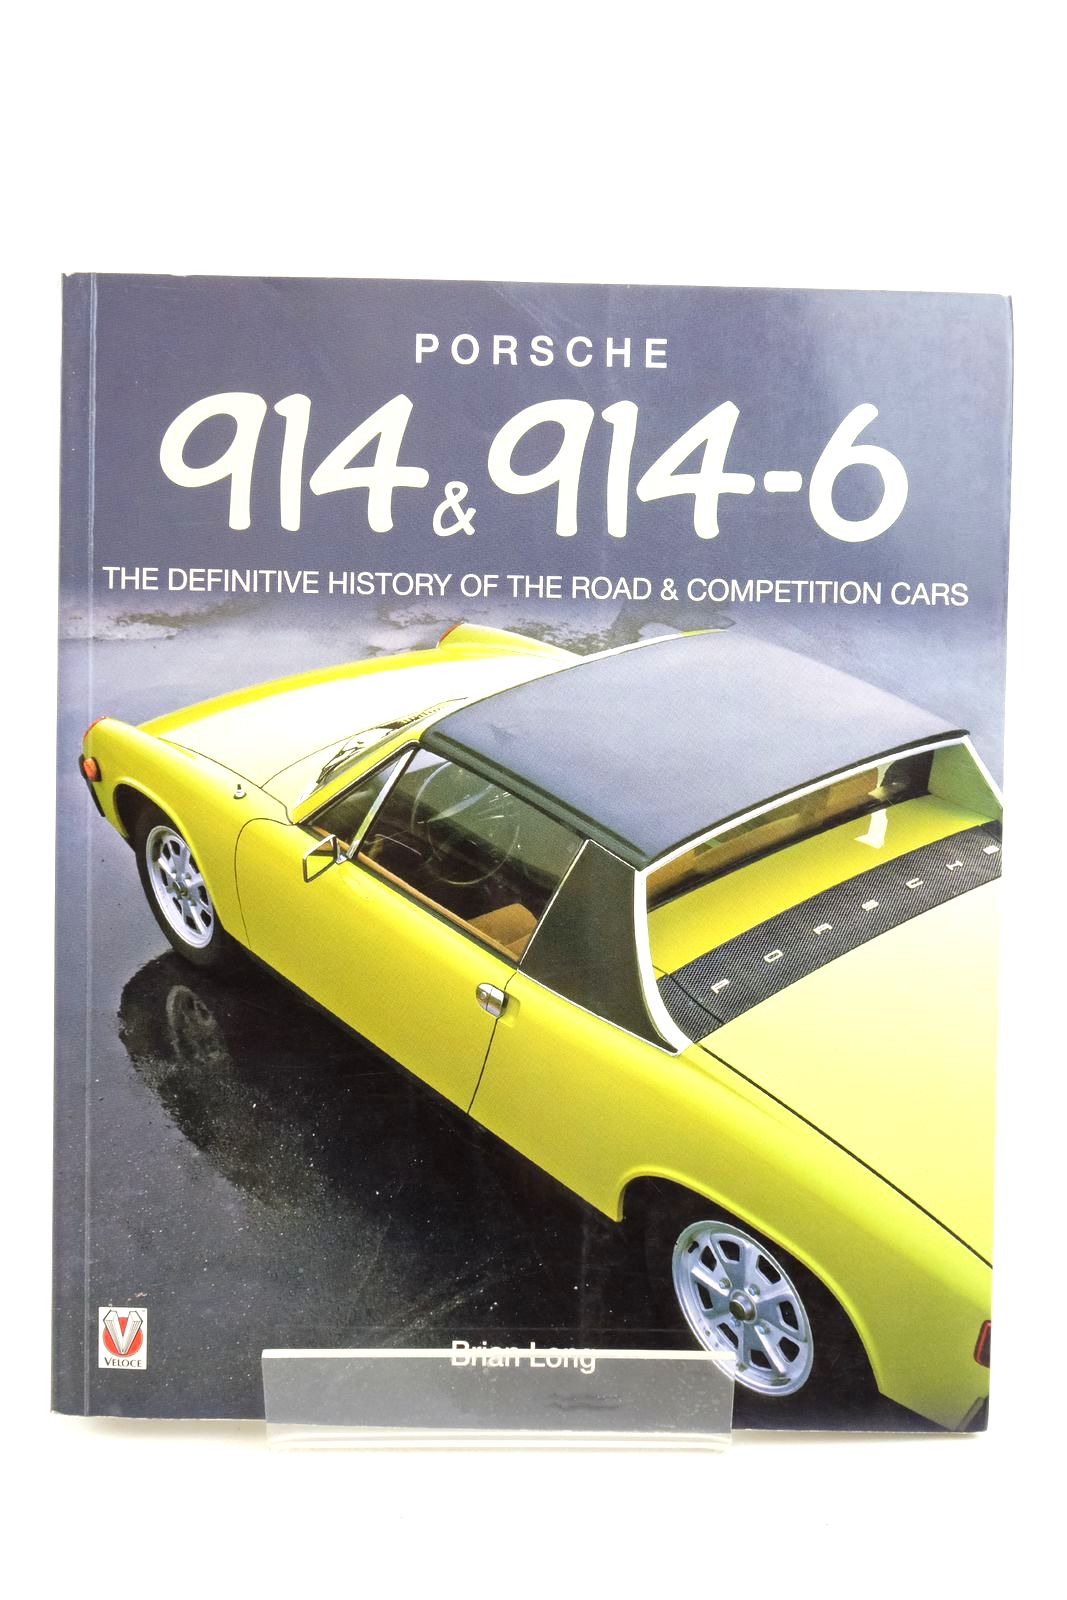 Photo of PORSCHE 914 &amp; 914-6: THE DEFINITIVE HISTORY OF THE ROAD &amp; COMPETITION CARS written by Long, Brian published by Veloce Publishing (STOCK CODE: 2137802)  for sale by Stella & Rose's Books